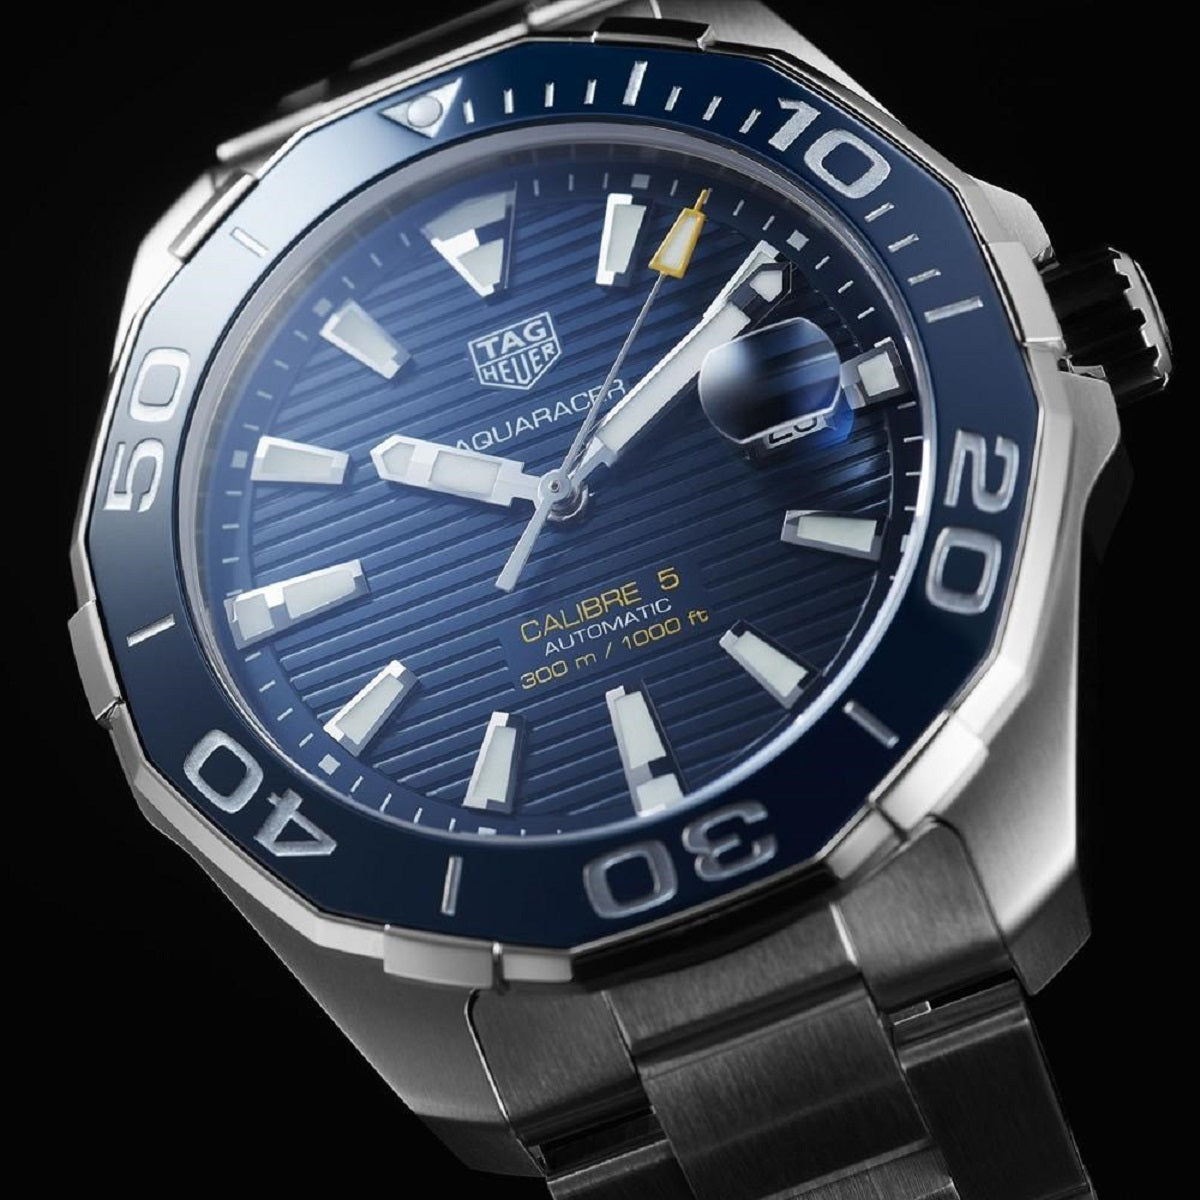 TAG HEUER Aquaracer Automatic Stainless Steel Blue Dial Mens Watch - WAY201B.BA0927